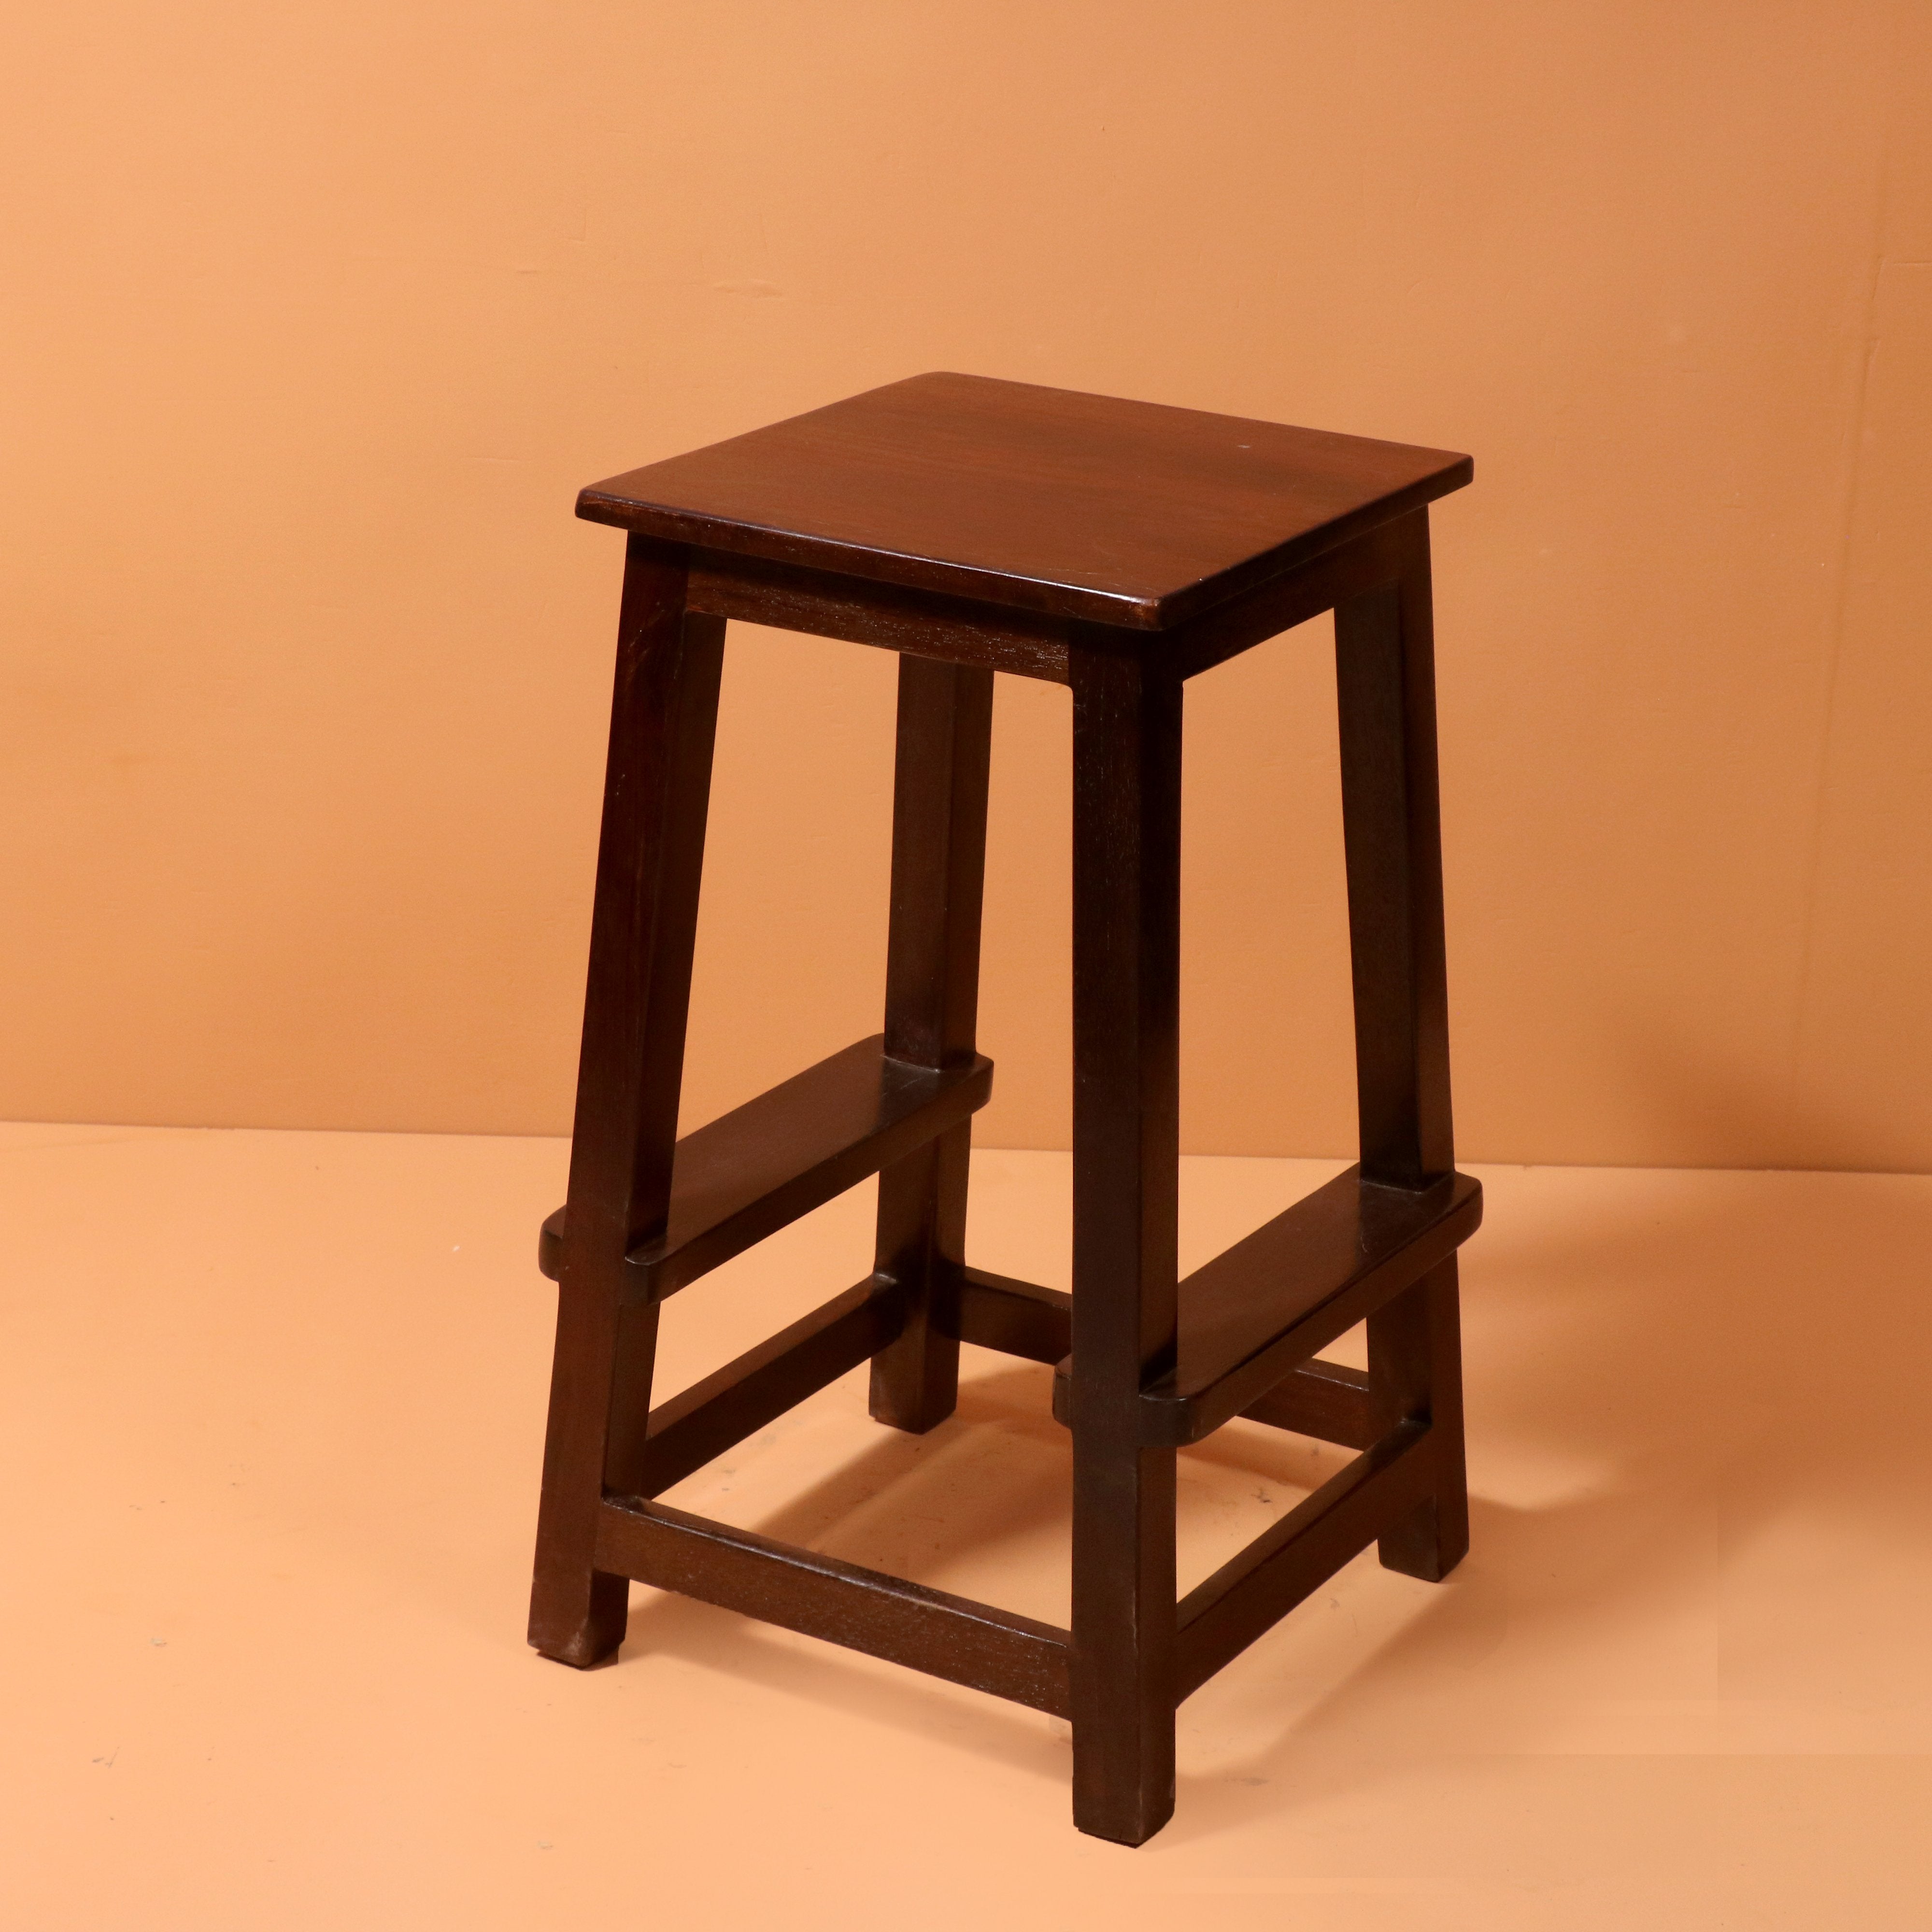 7 Tips to Keep in Mind while Buying a Wooden Stool